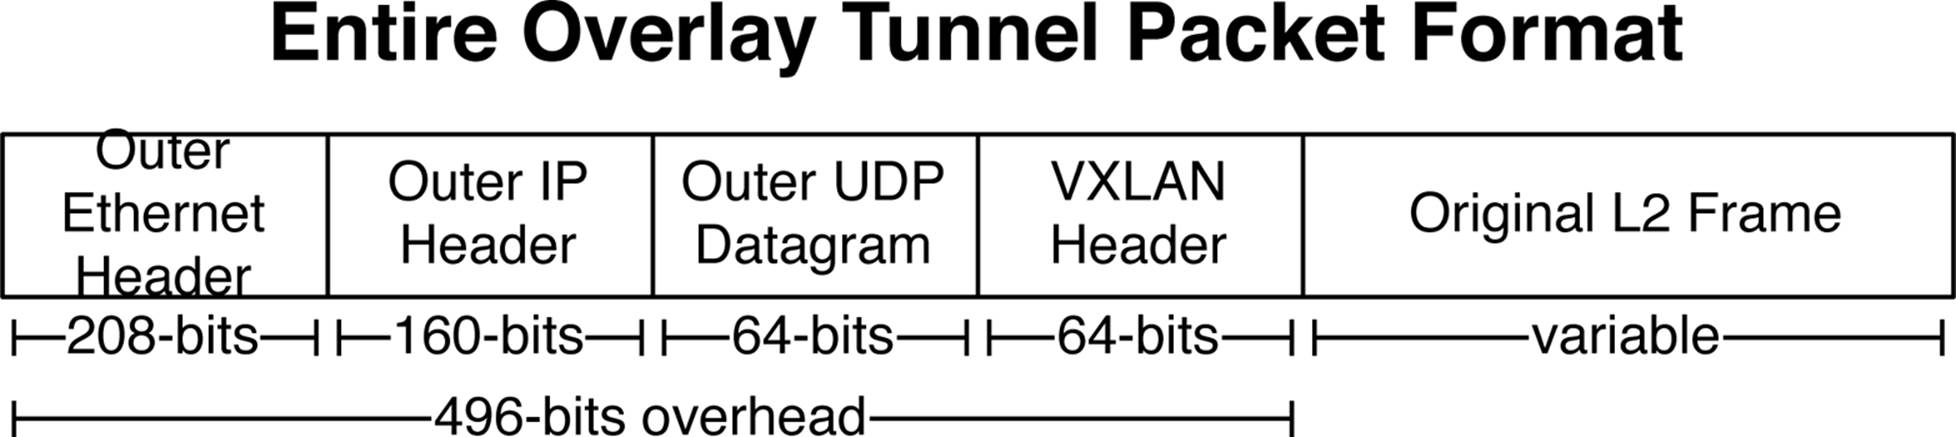 The entire overlay tunnel packet format